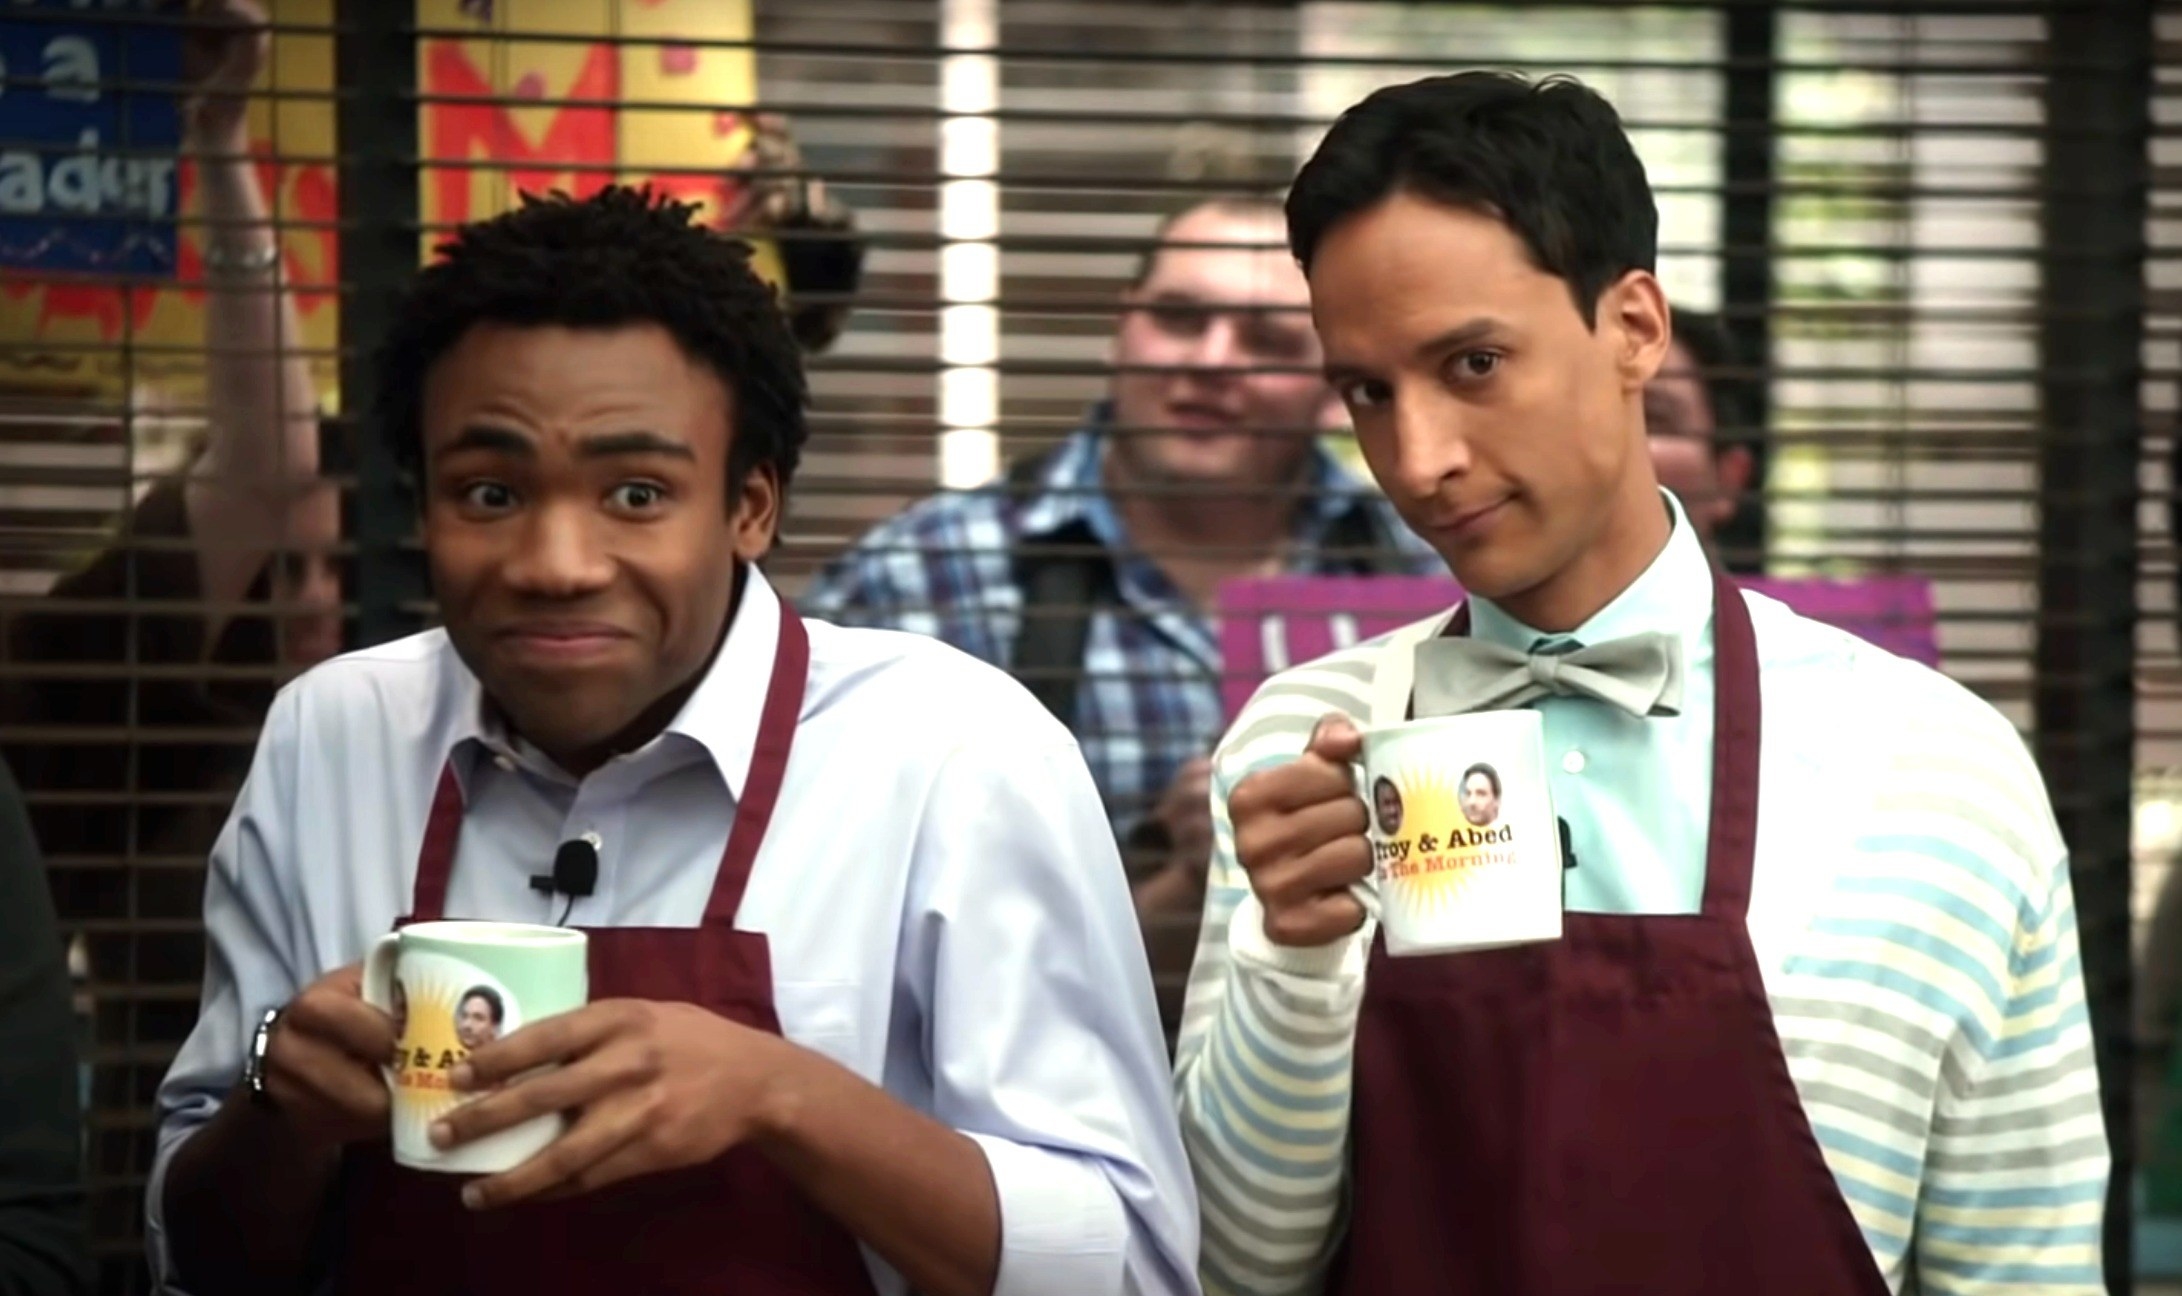 troy and abed holding up mugs with their faces